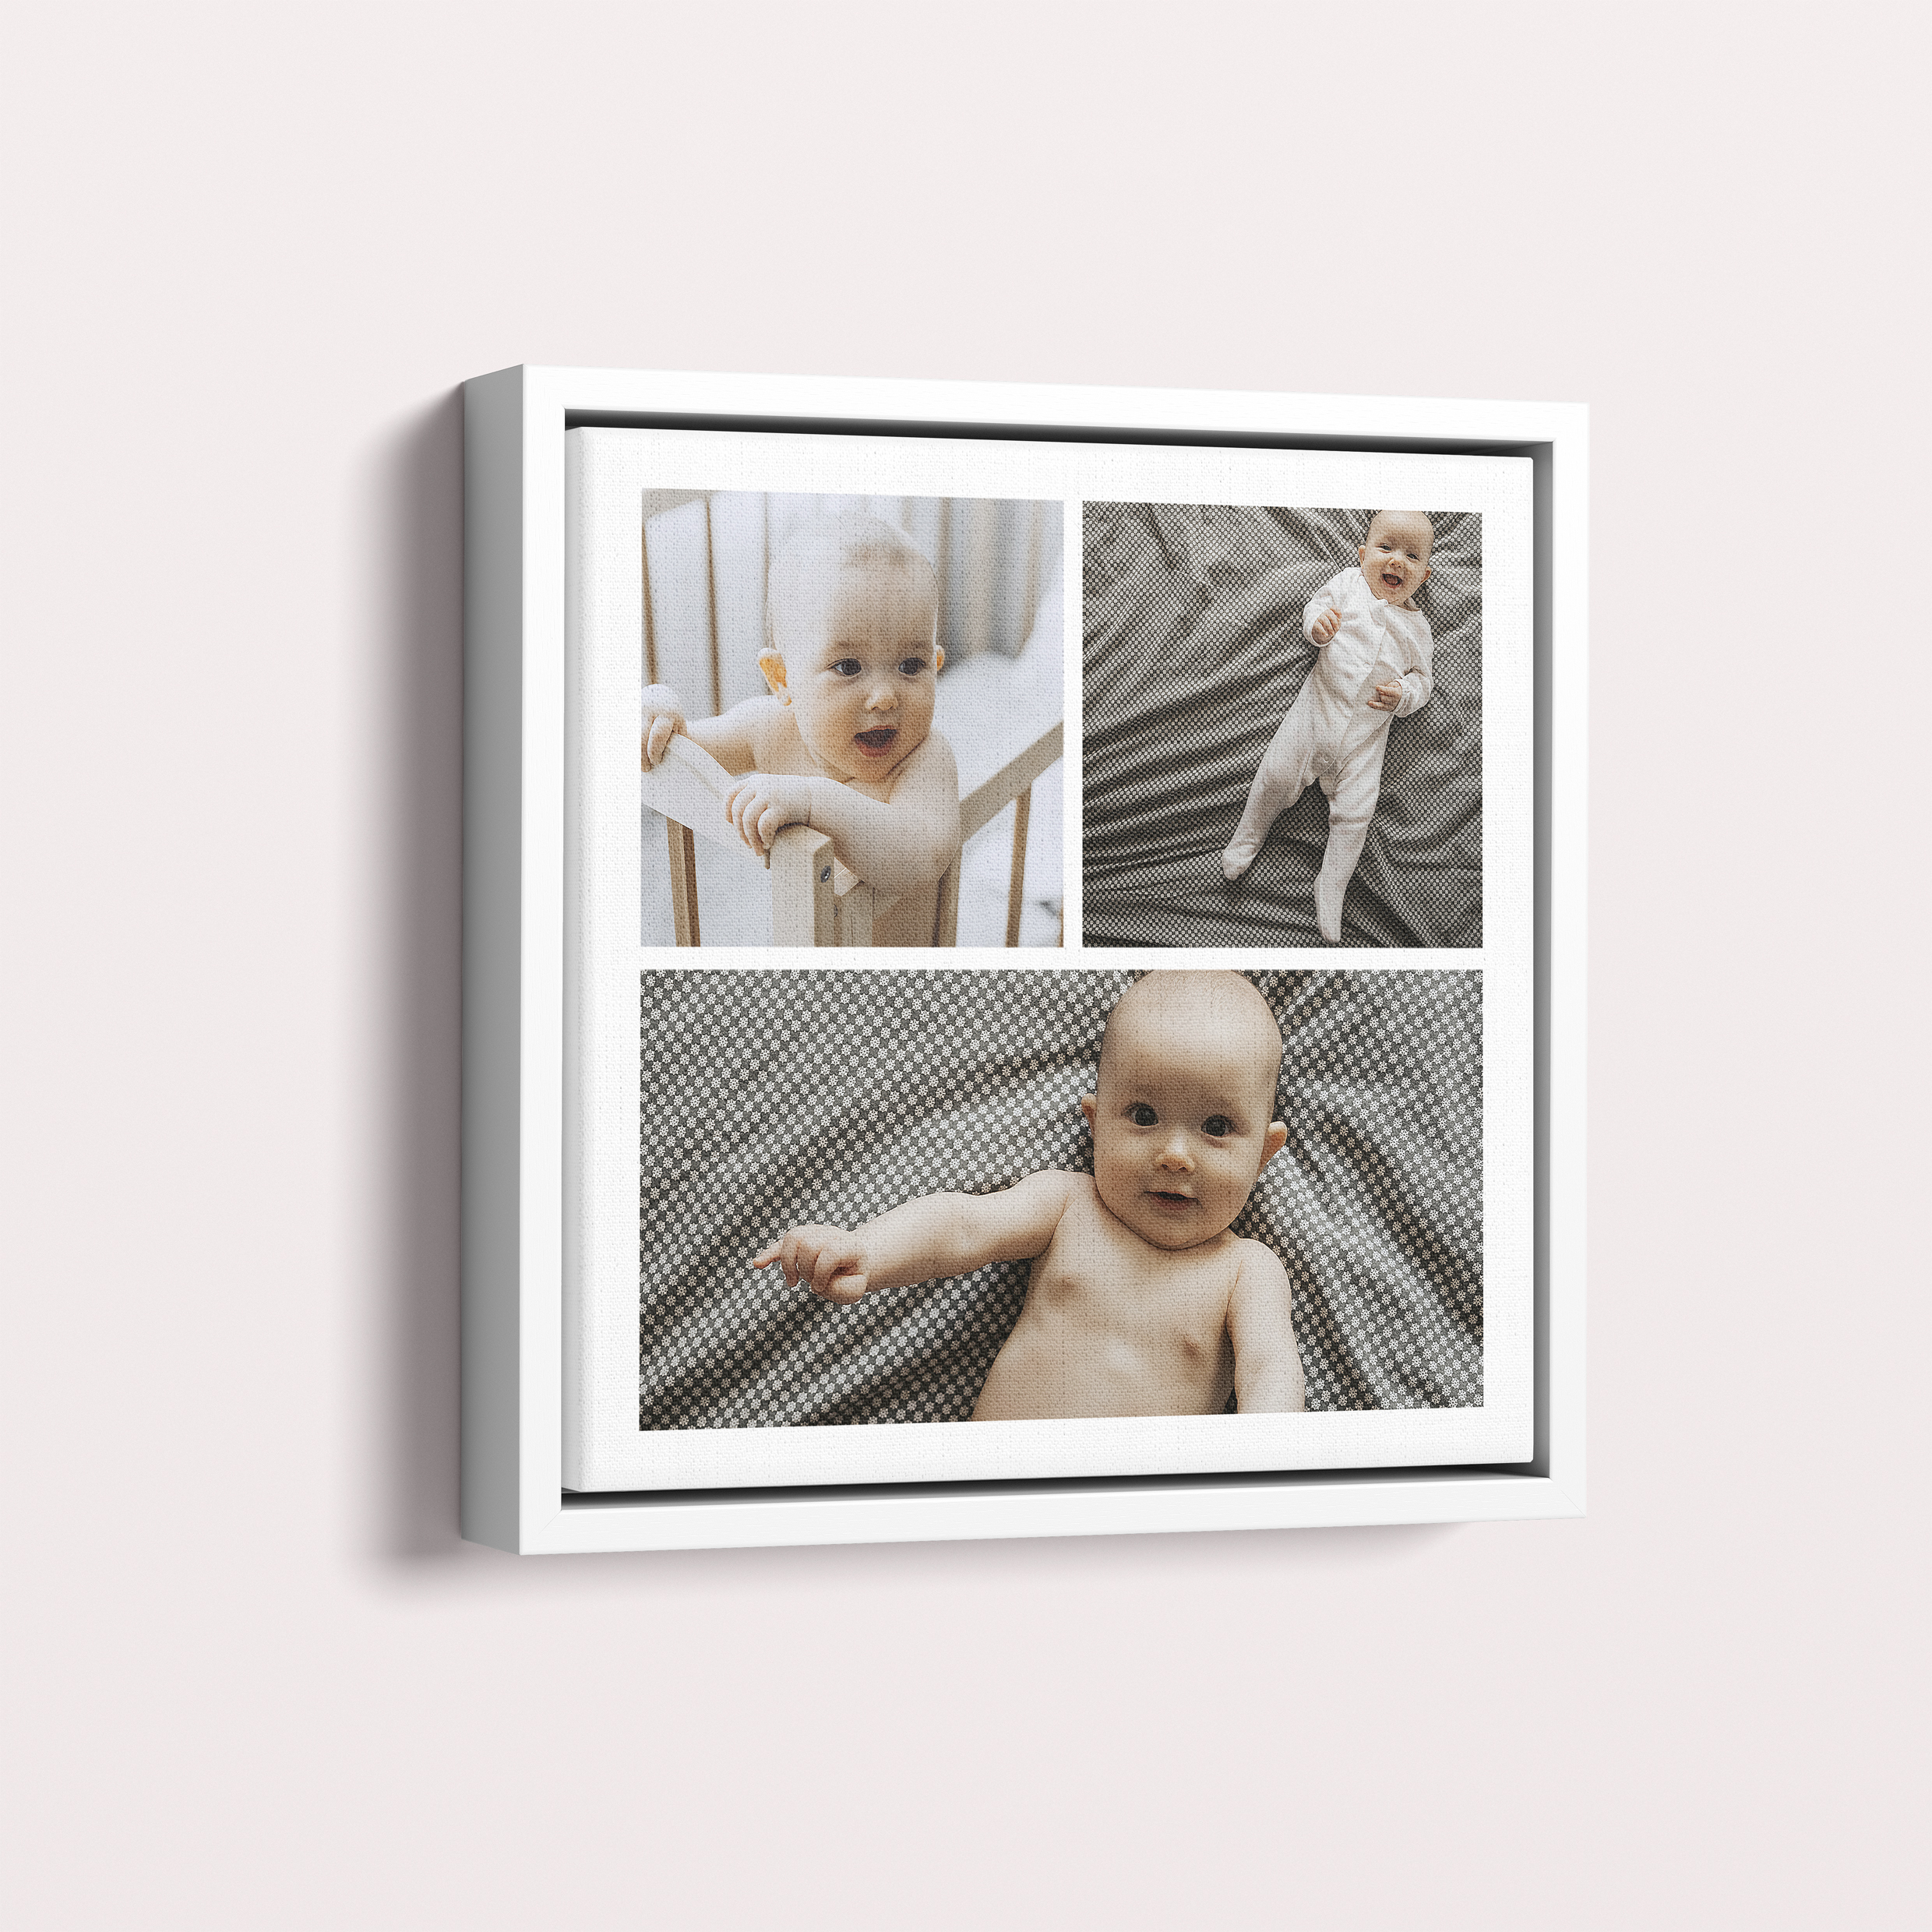 Childhood Kaleidoscope Framed Photo Canvas - Relive the magic of childhood with this portrait-oriented canvas that holds up to 5 photos. Crafted with durable polyester canvas and a sustainably sourced wooden frame, it's a stylish and enduring way to preserve cherished memories.